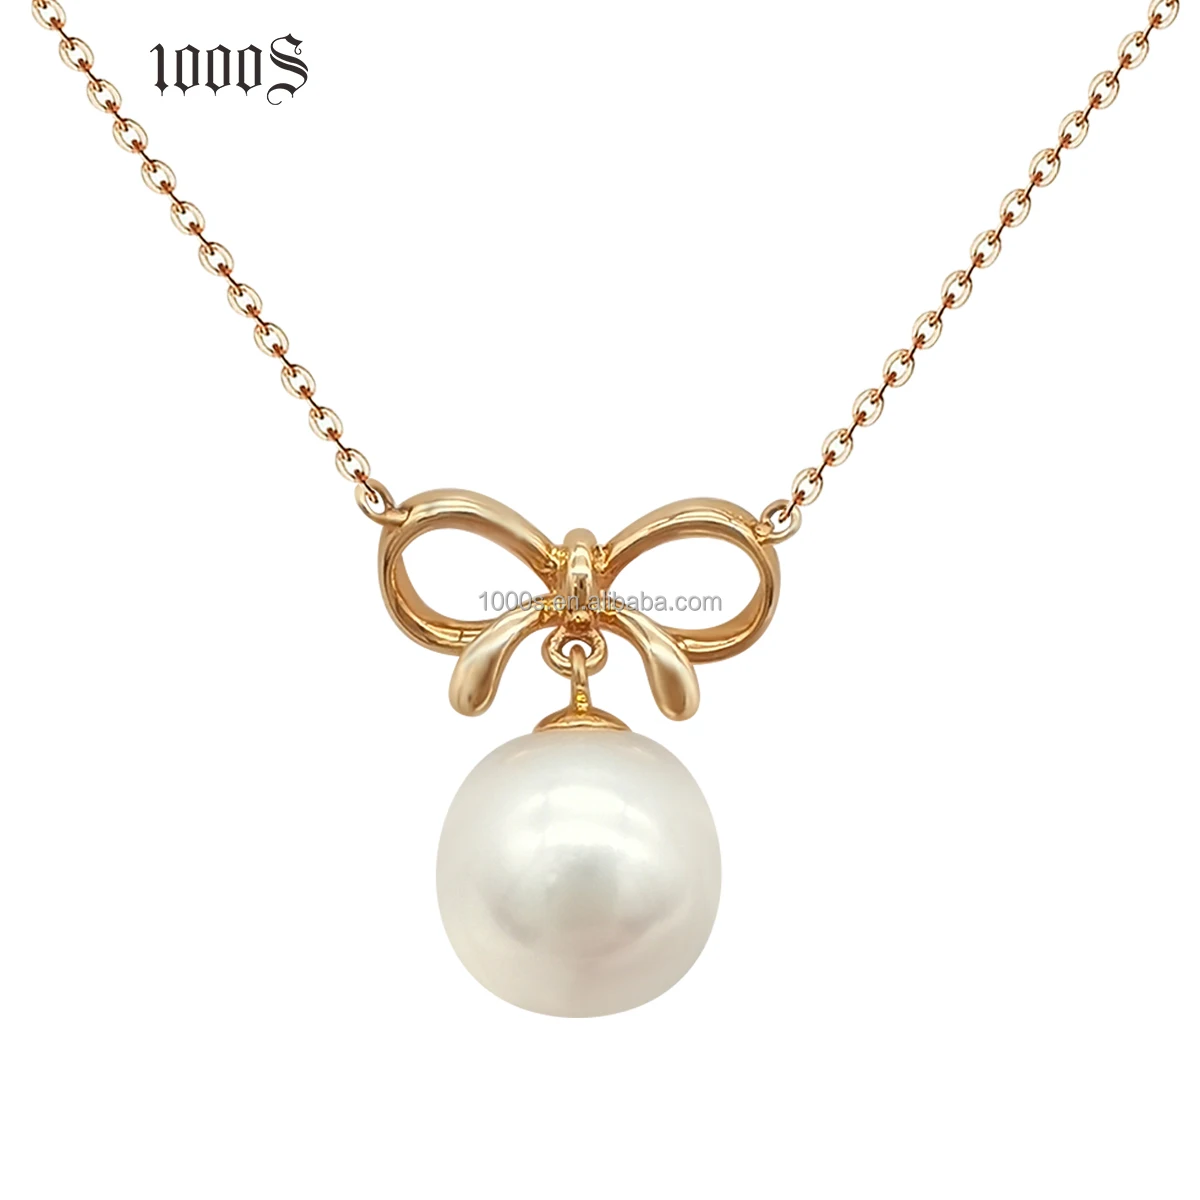 

Luxury 18k Yellow Gold Genuine Freshwater Pearl Pendant Necklace Sparkle O Chain Necklace Jewelry for Women